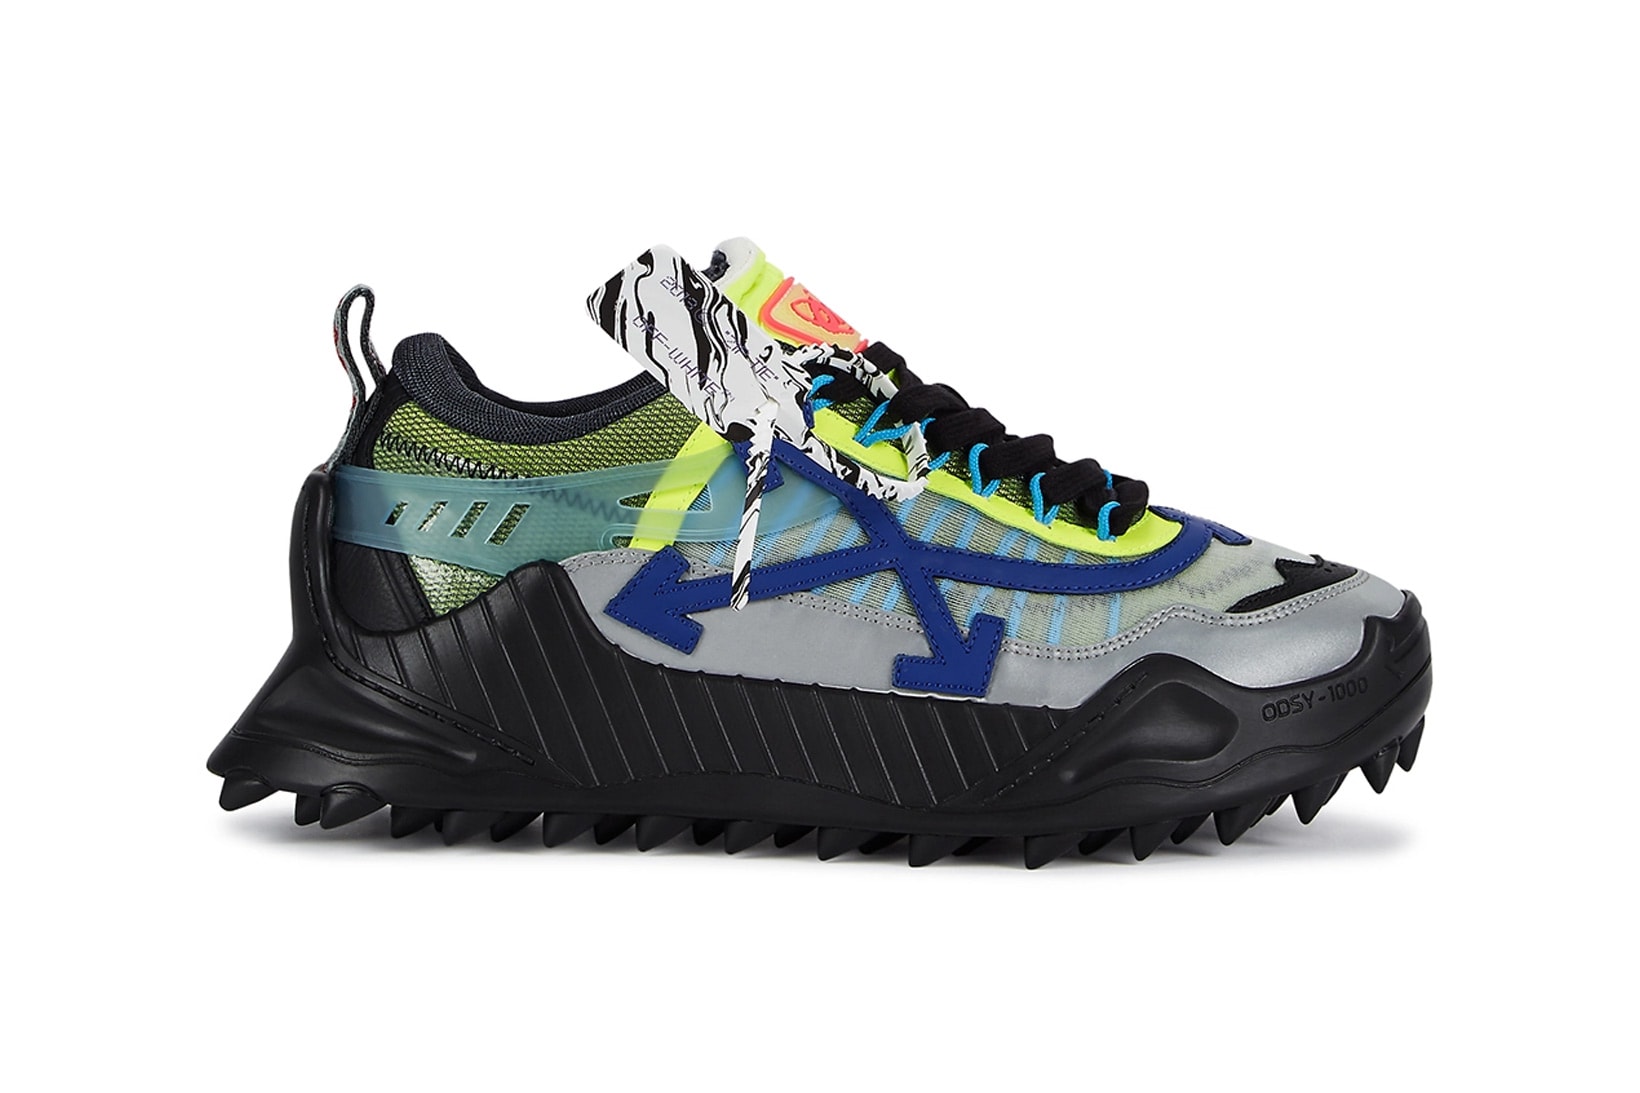 off-white odsy-1000 chunky sneakers new colorways release black blue red virgil abloh